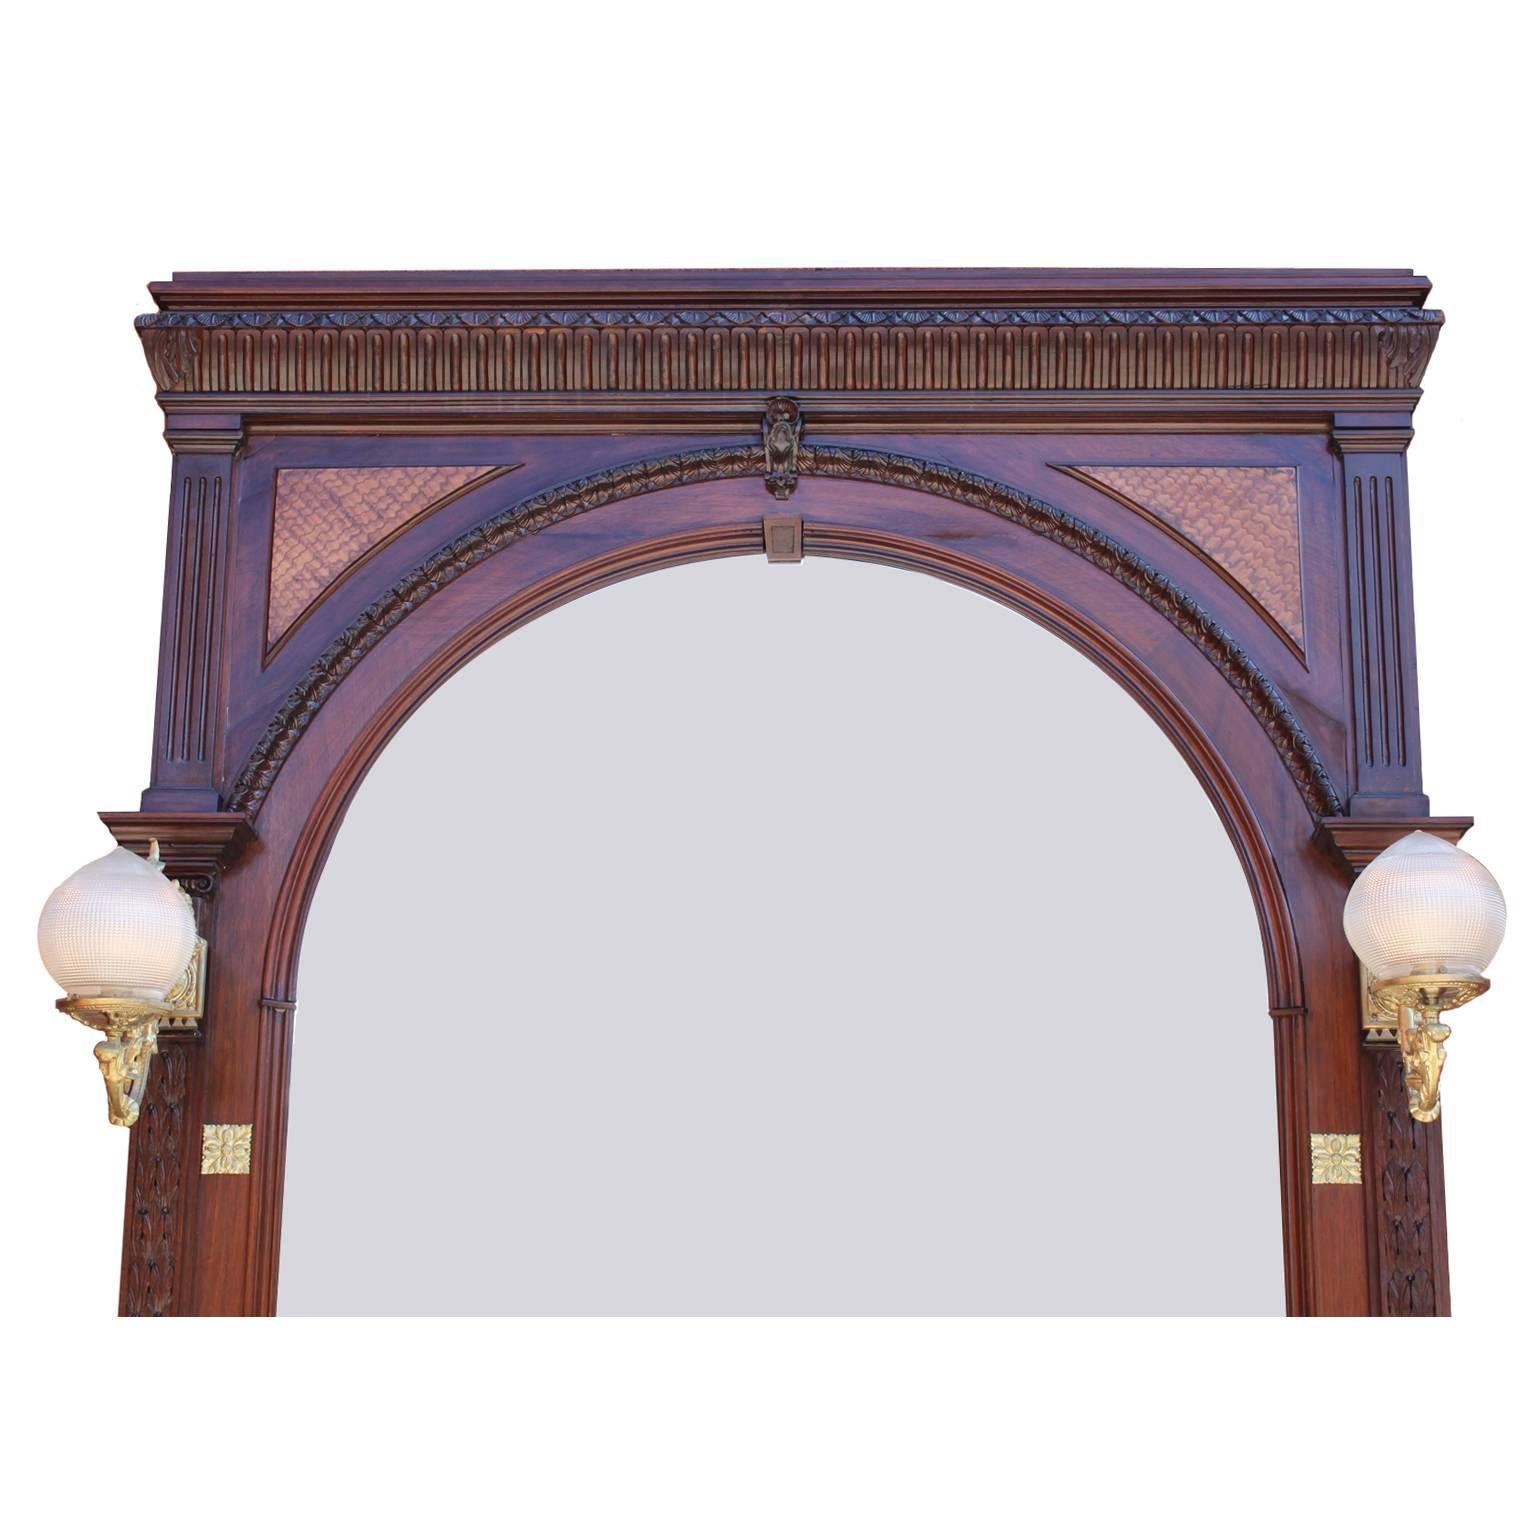 A large French 19th-20th century Louis XVI style carved mahogany and satinwood architectural mirror frame and planter. The elongated carved frame with a bevelled domed mirror, flanked by a pair of gilt-bronze single-light gasolier sconces (now